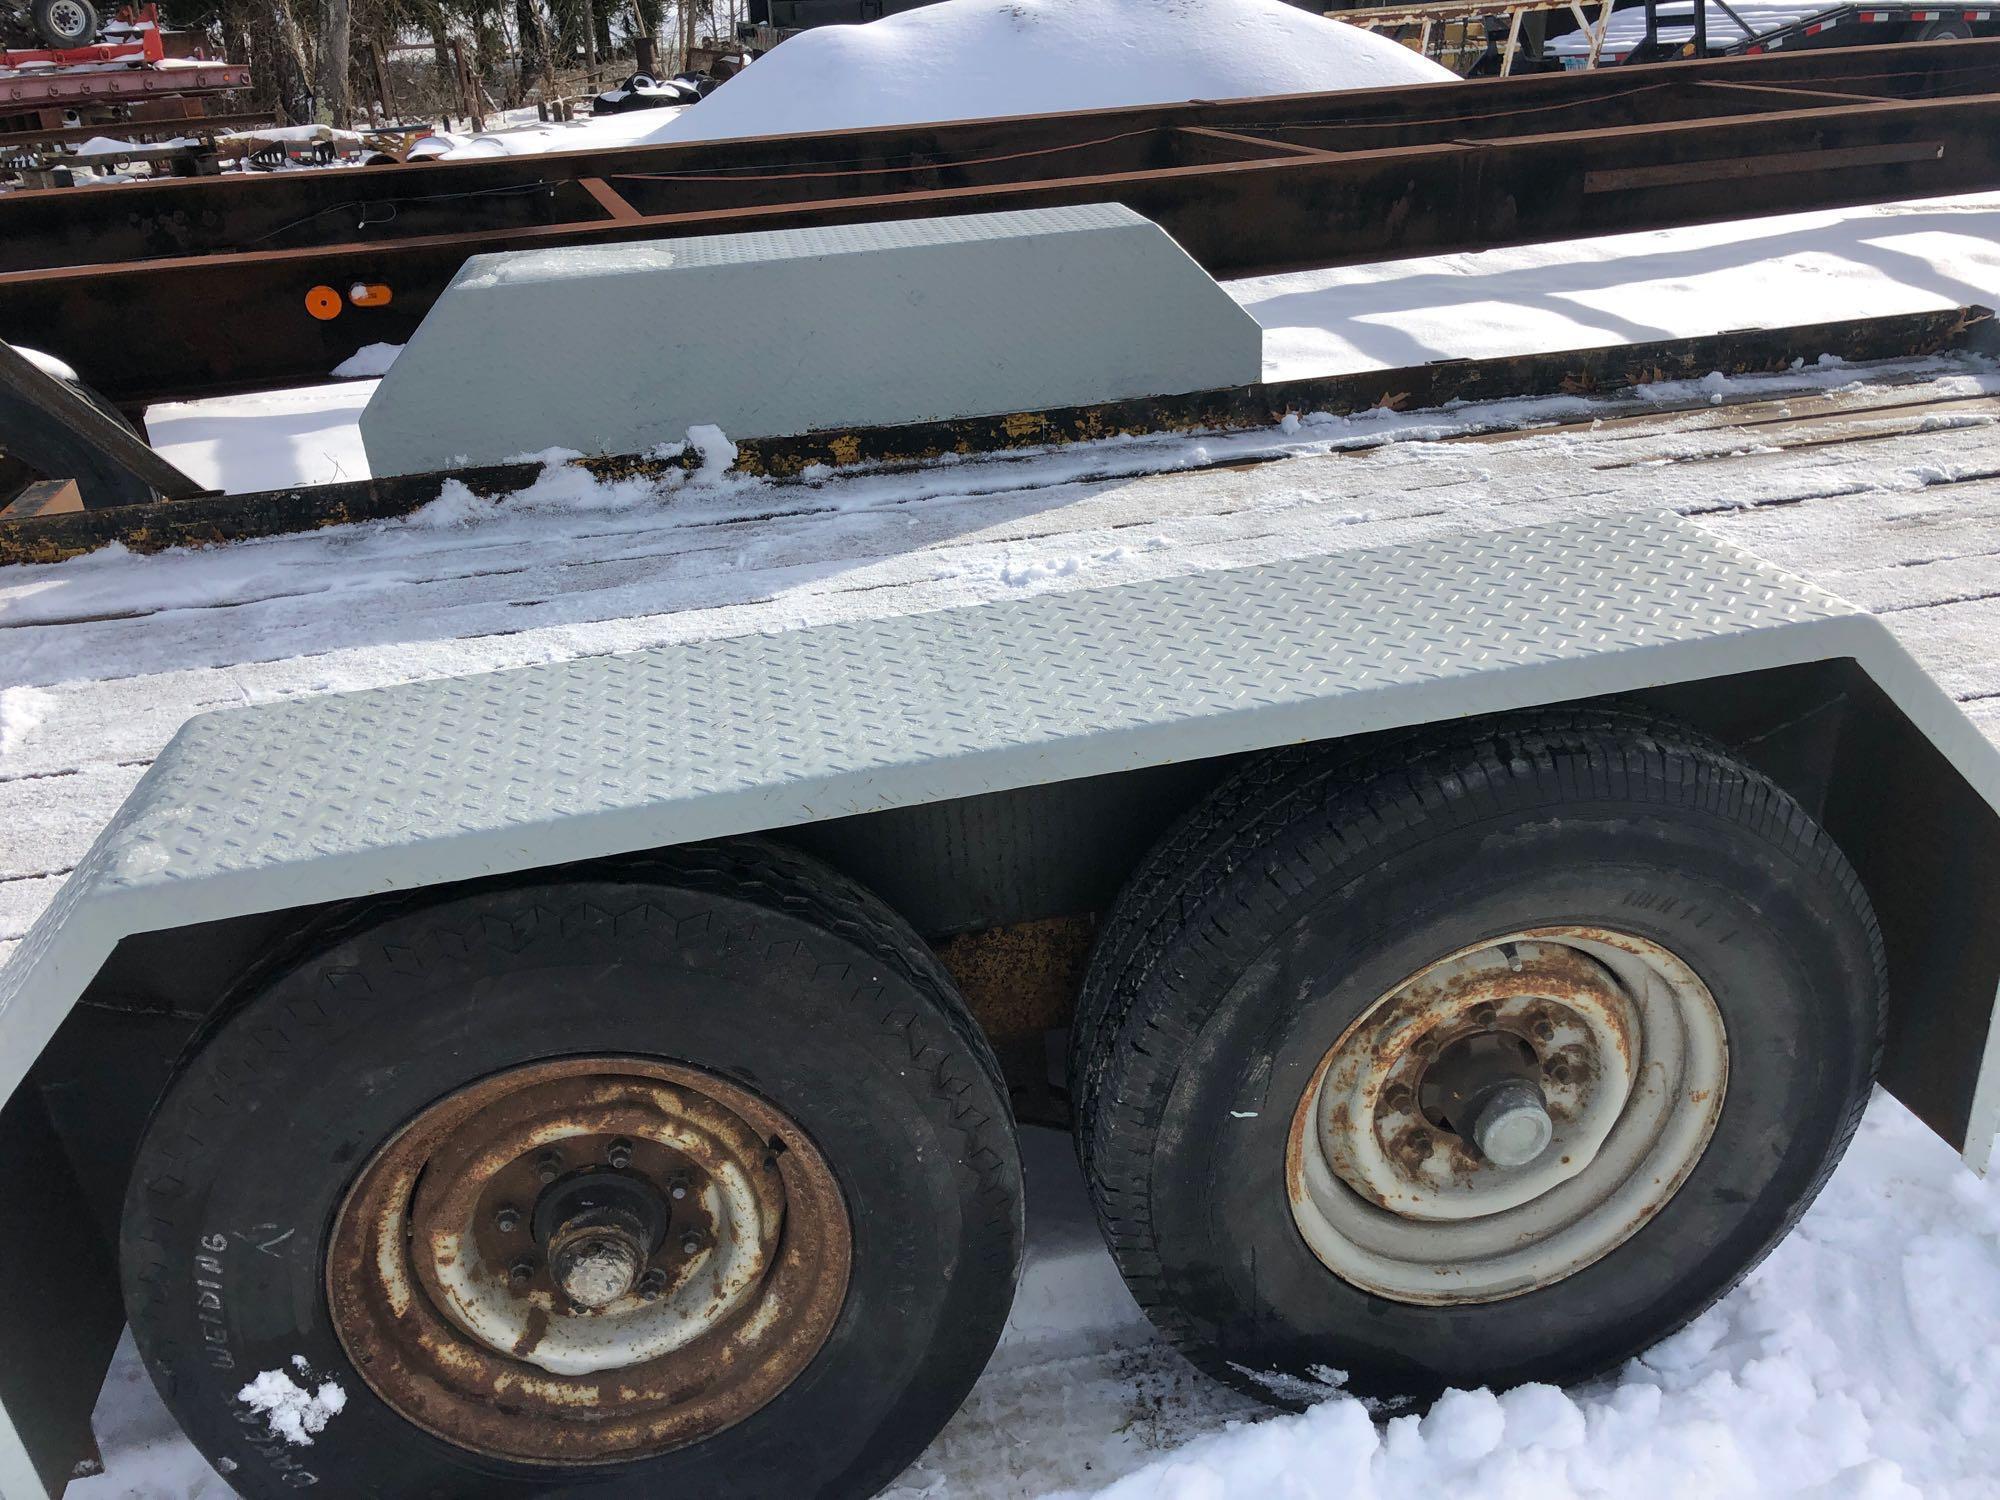 14 ft x 75 in bumper hitch trailer, wood floor, metal ramps, pintle hitch, untitled